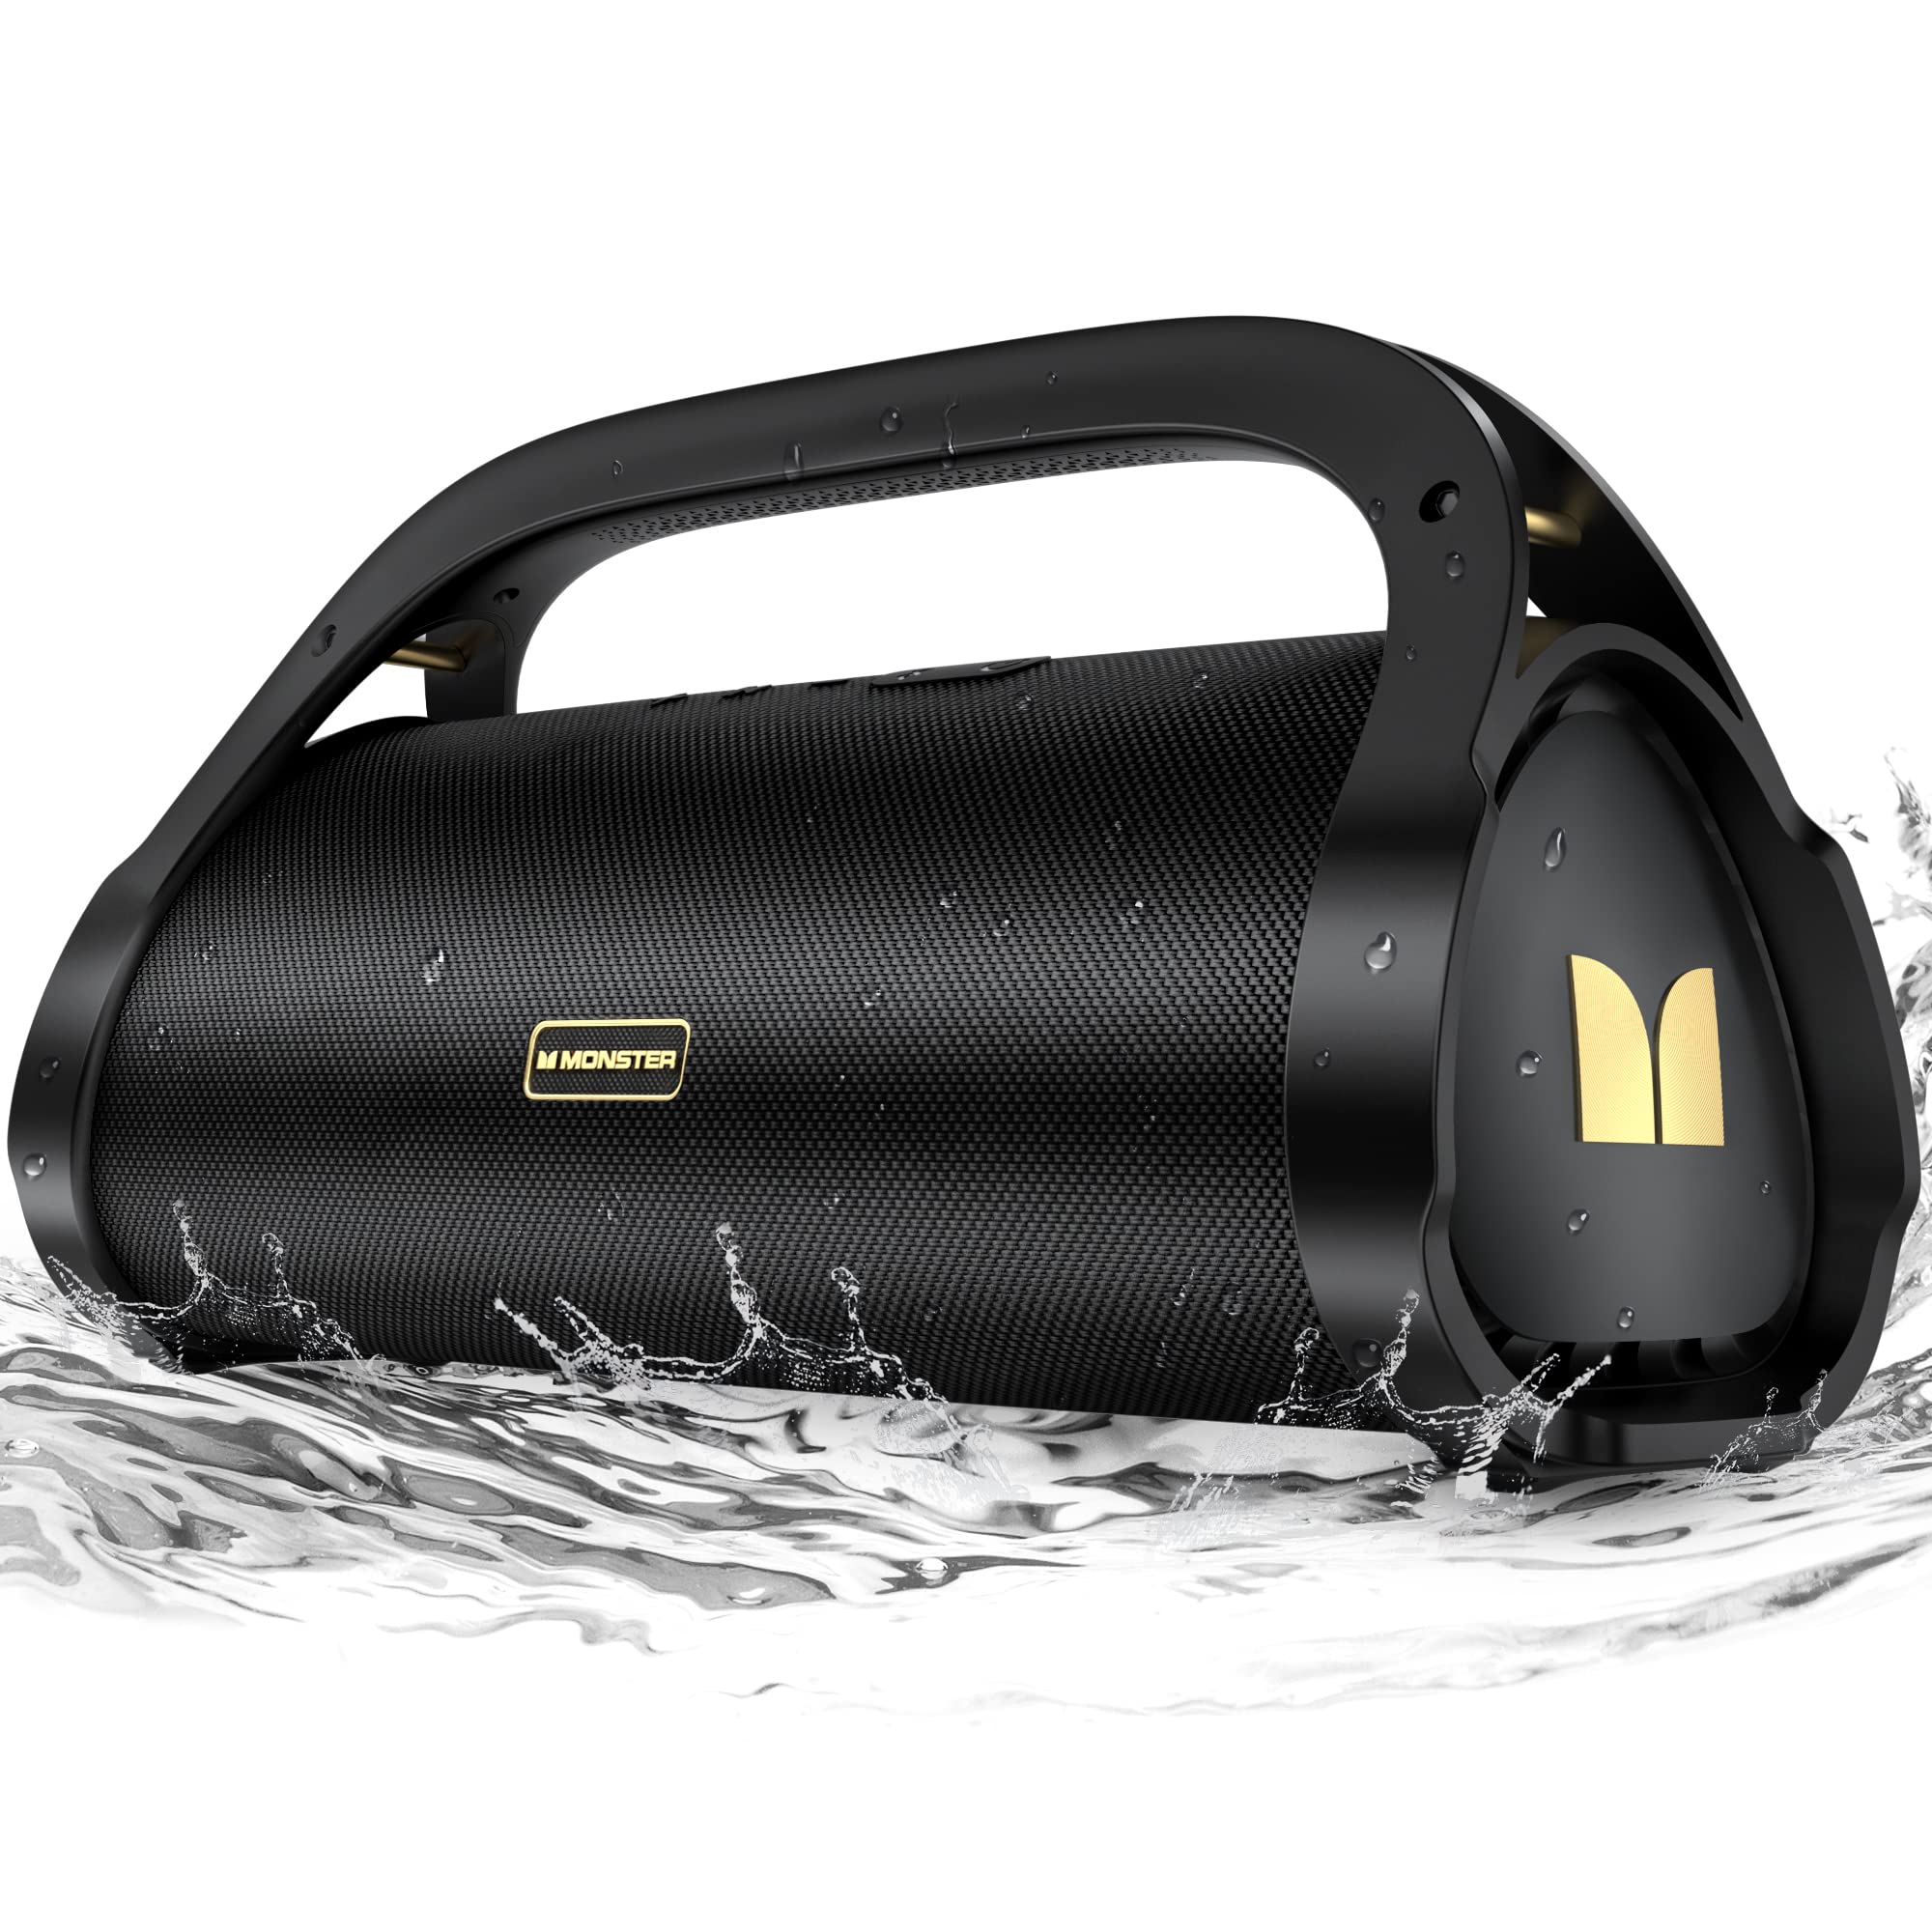 MONSTER Adventurer Max Portable Bluetooth Speaker, IPX7 Waterproof Wireless Speaker with Subwoofer Rich Bass, 100W Stereo Loud Sound Speaker with 24H Playtime for Outdoor Party, Pool Beach, Gold